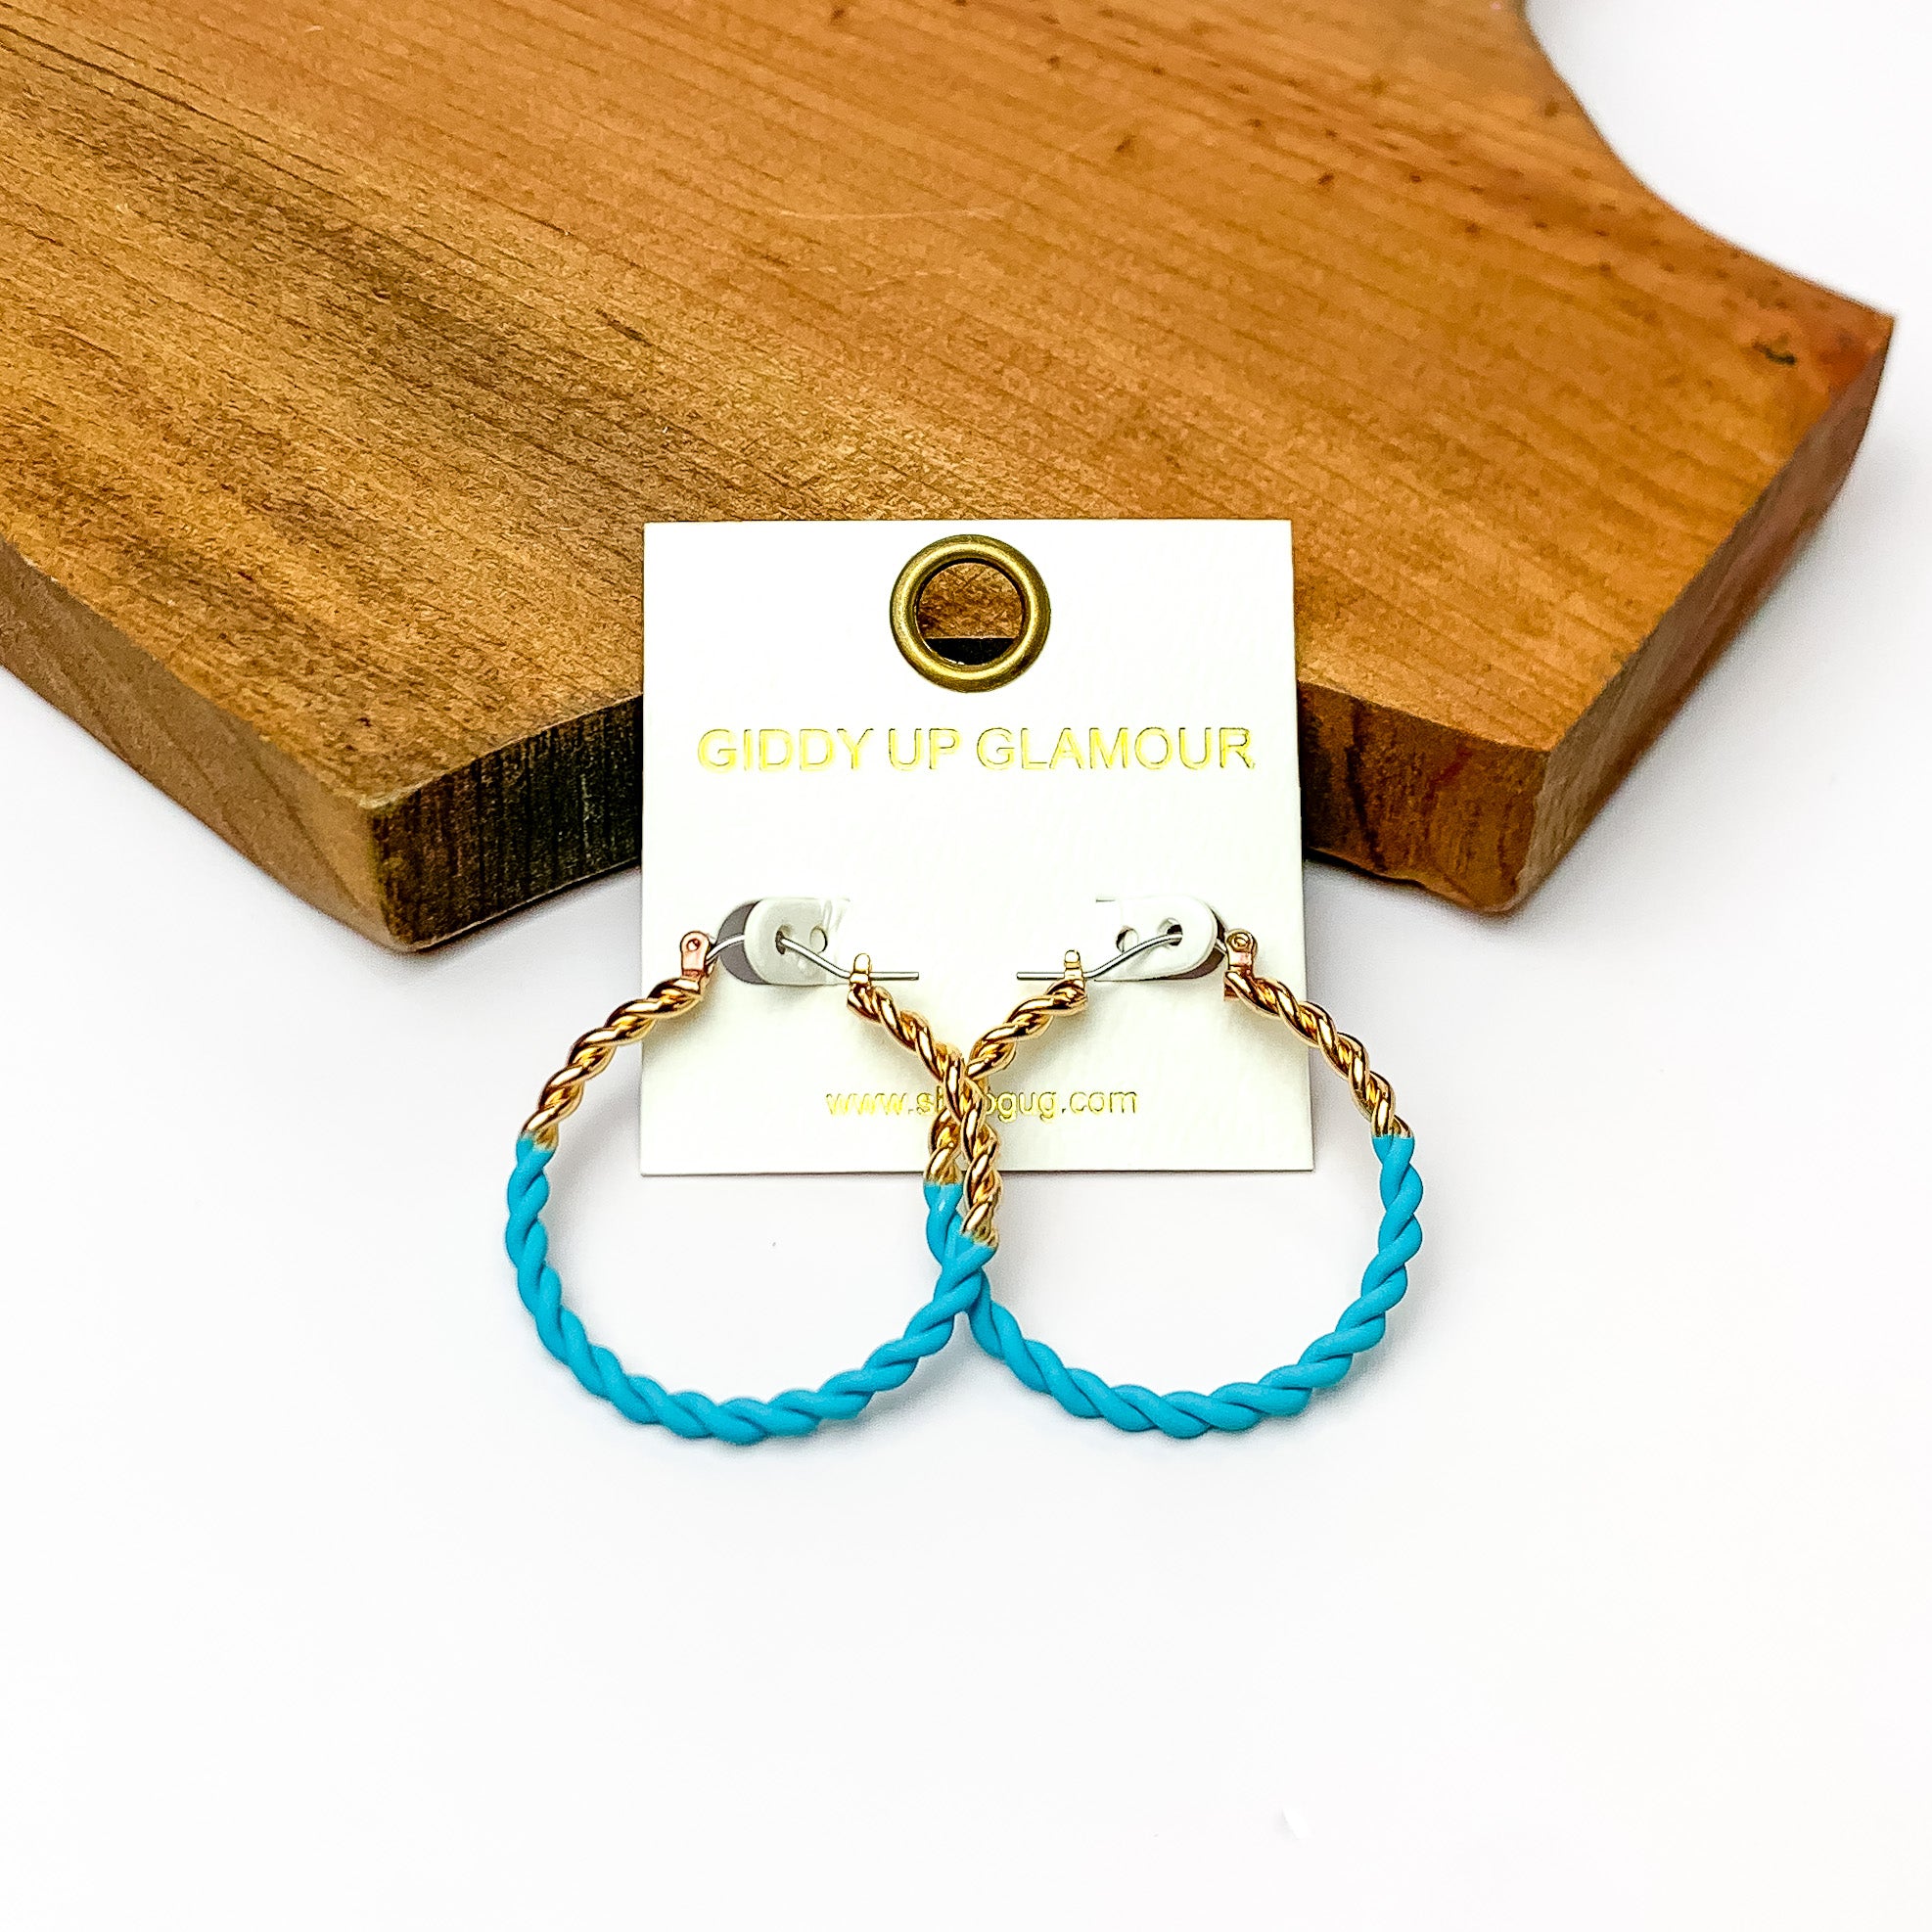 Twisted Gold Tone Hoop Earrings in Ocean Blue - Giddy Up Glamour Boutique